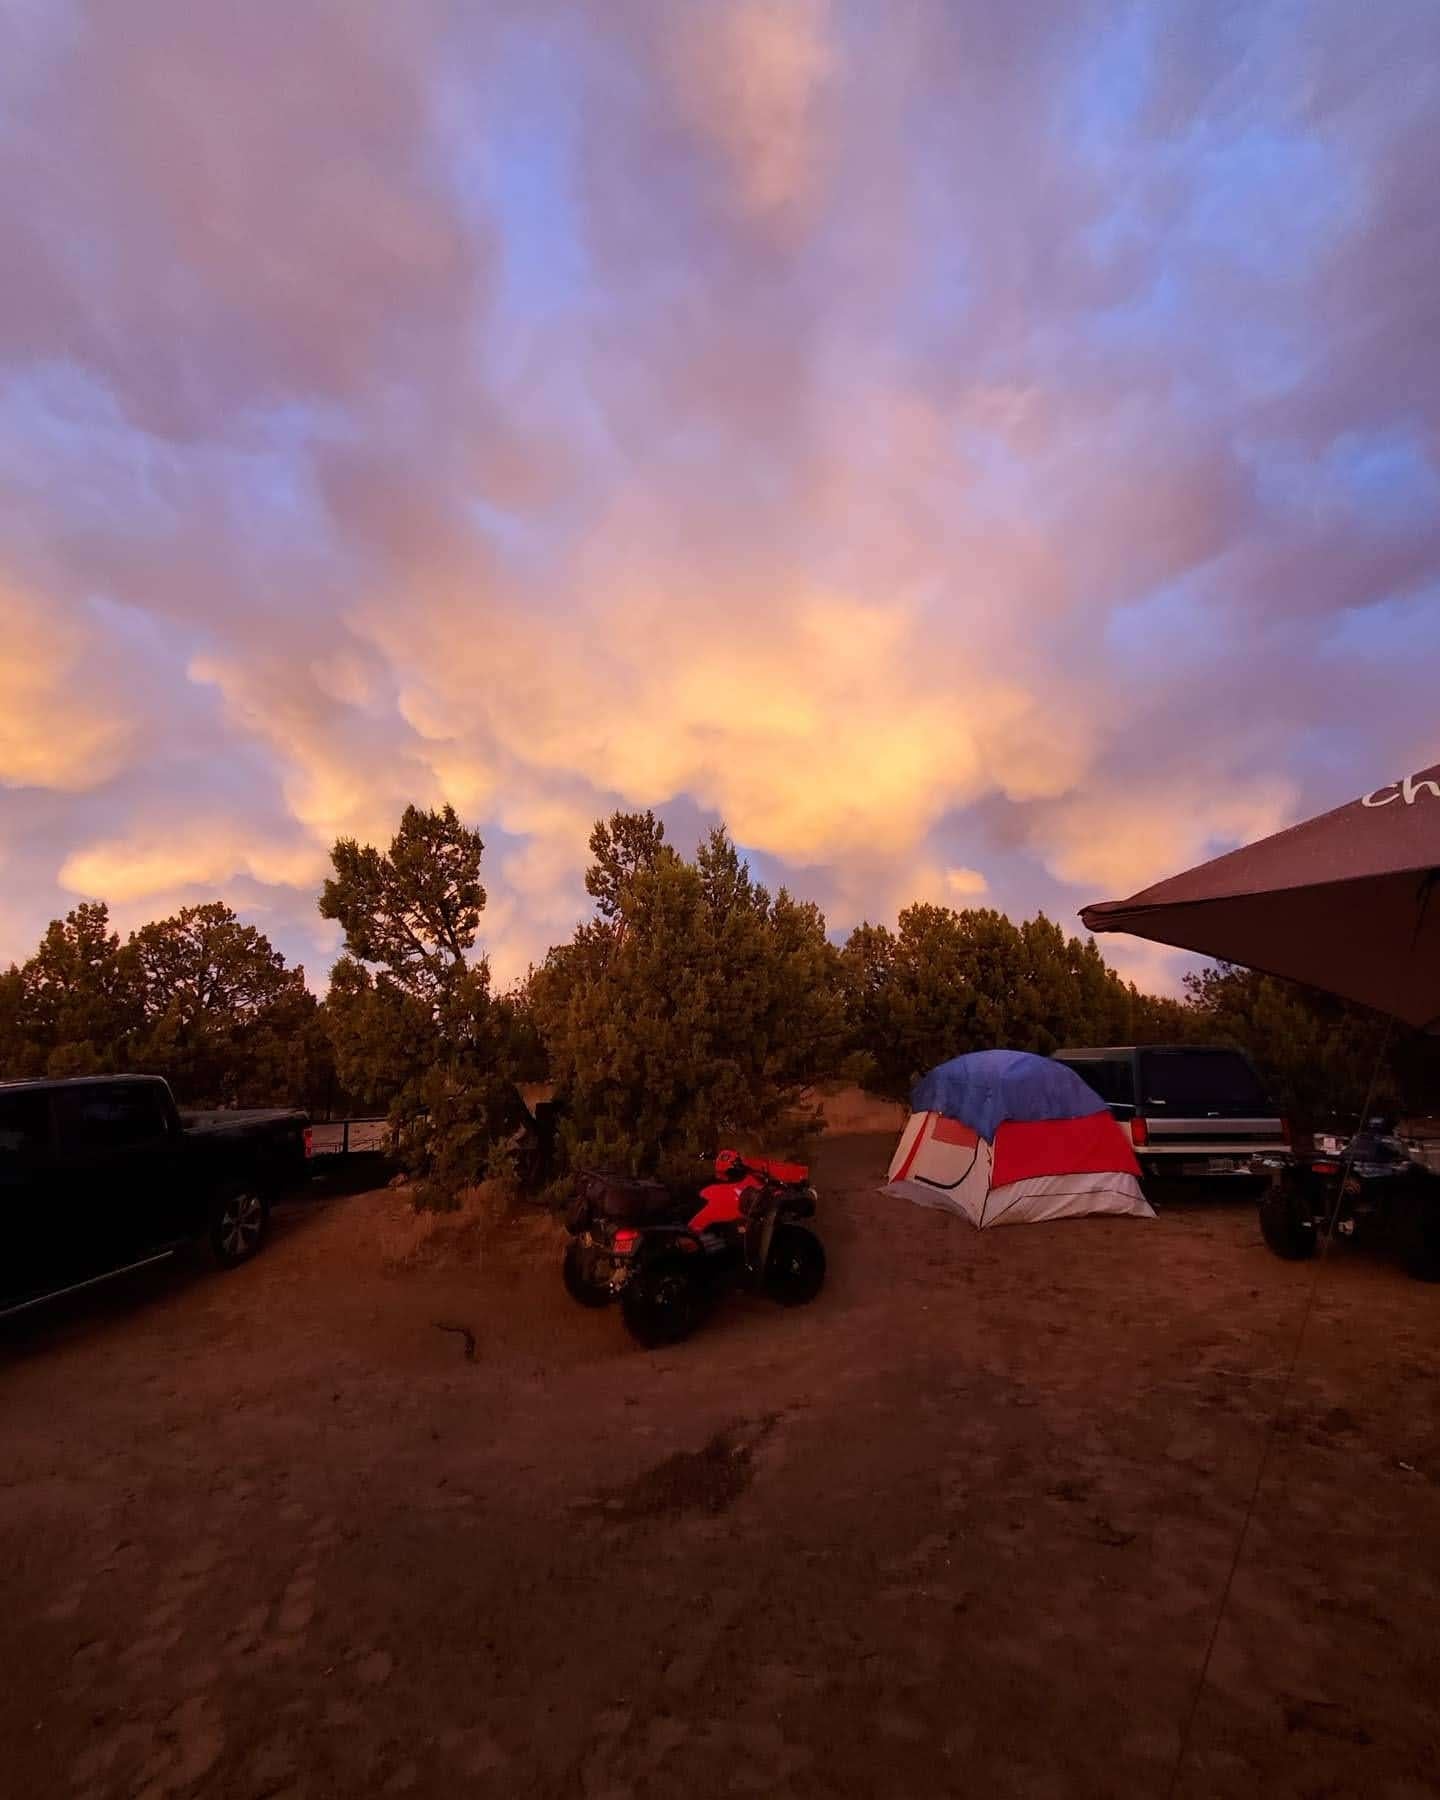 Camper submitted image from Cherry creek - 2